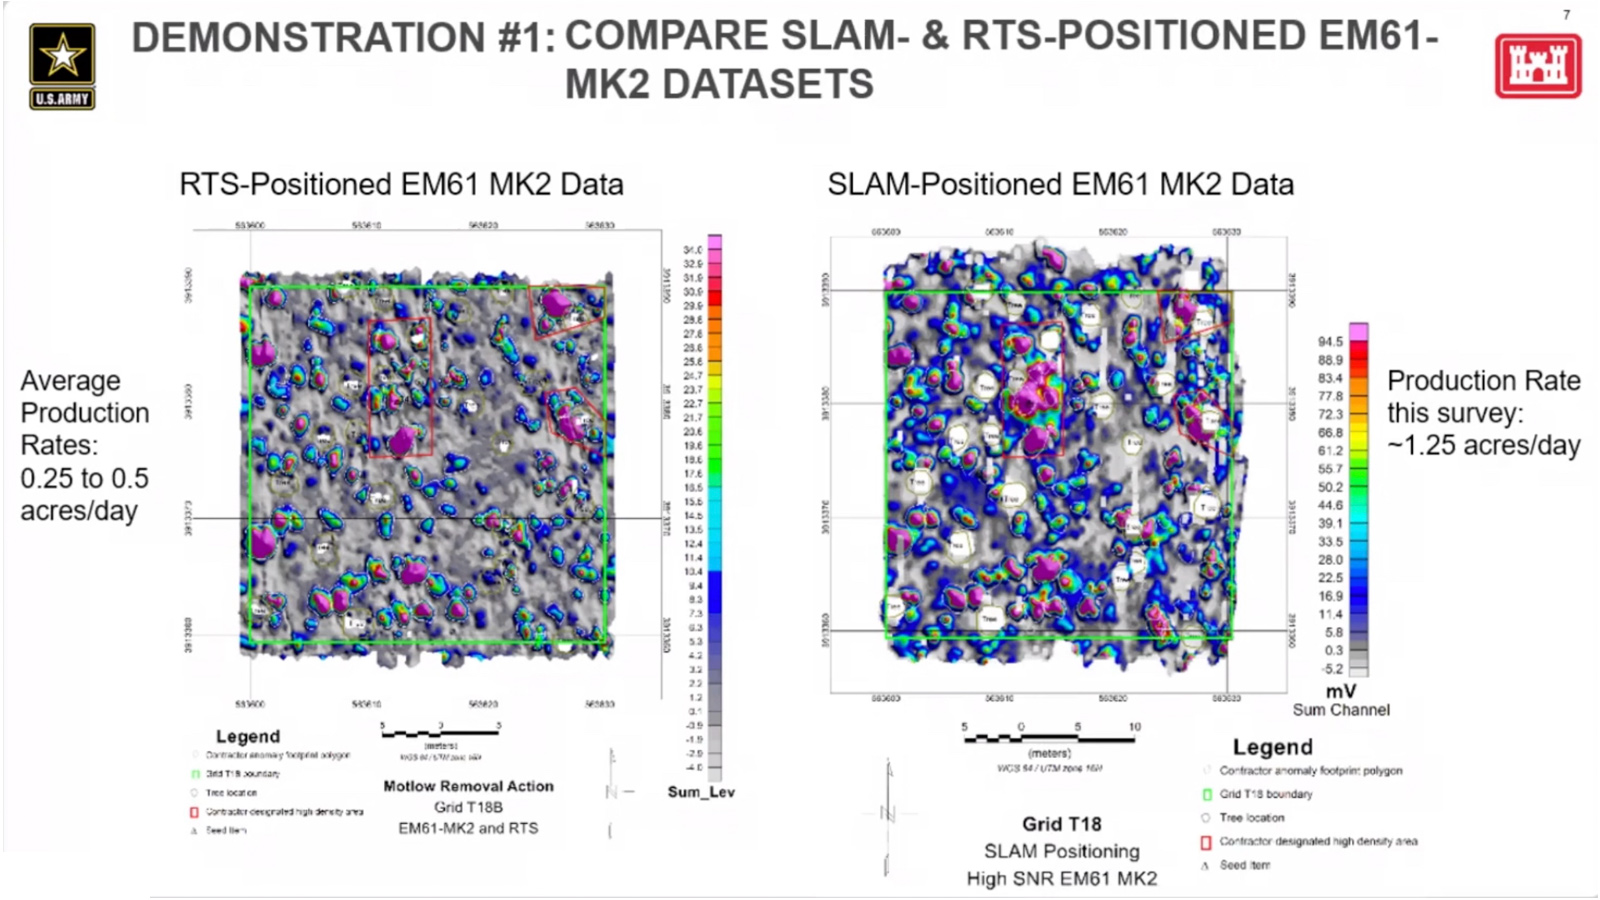 Excerpt from USACE SLAM Positioning Demonstrations For DGM At MMR Sites report: Comparison shows RTS average production rates of .25 to .5 acres/day and SLAM system production rates of 1.25 acres/day.